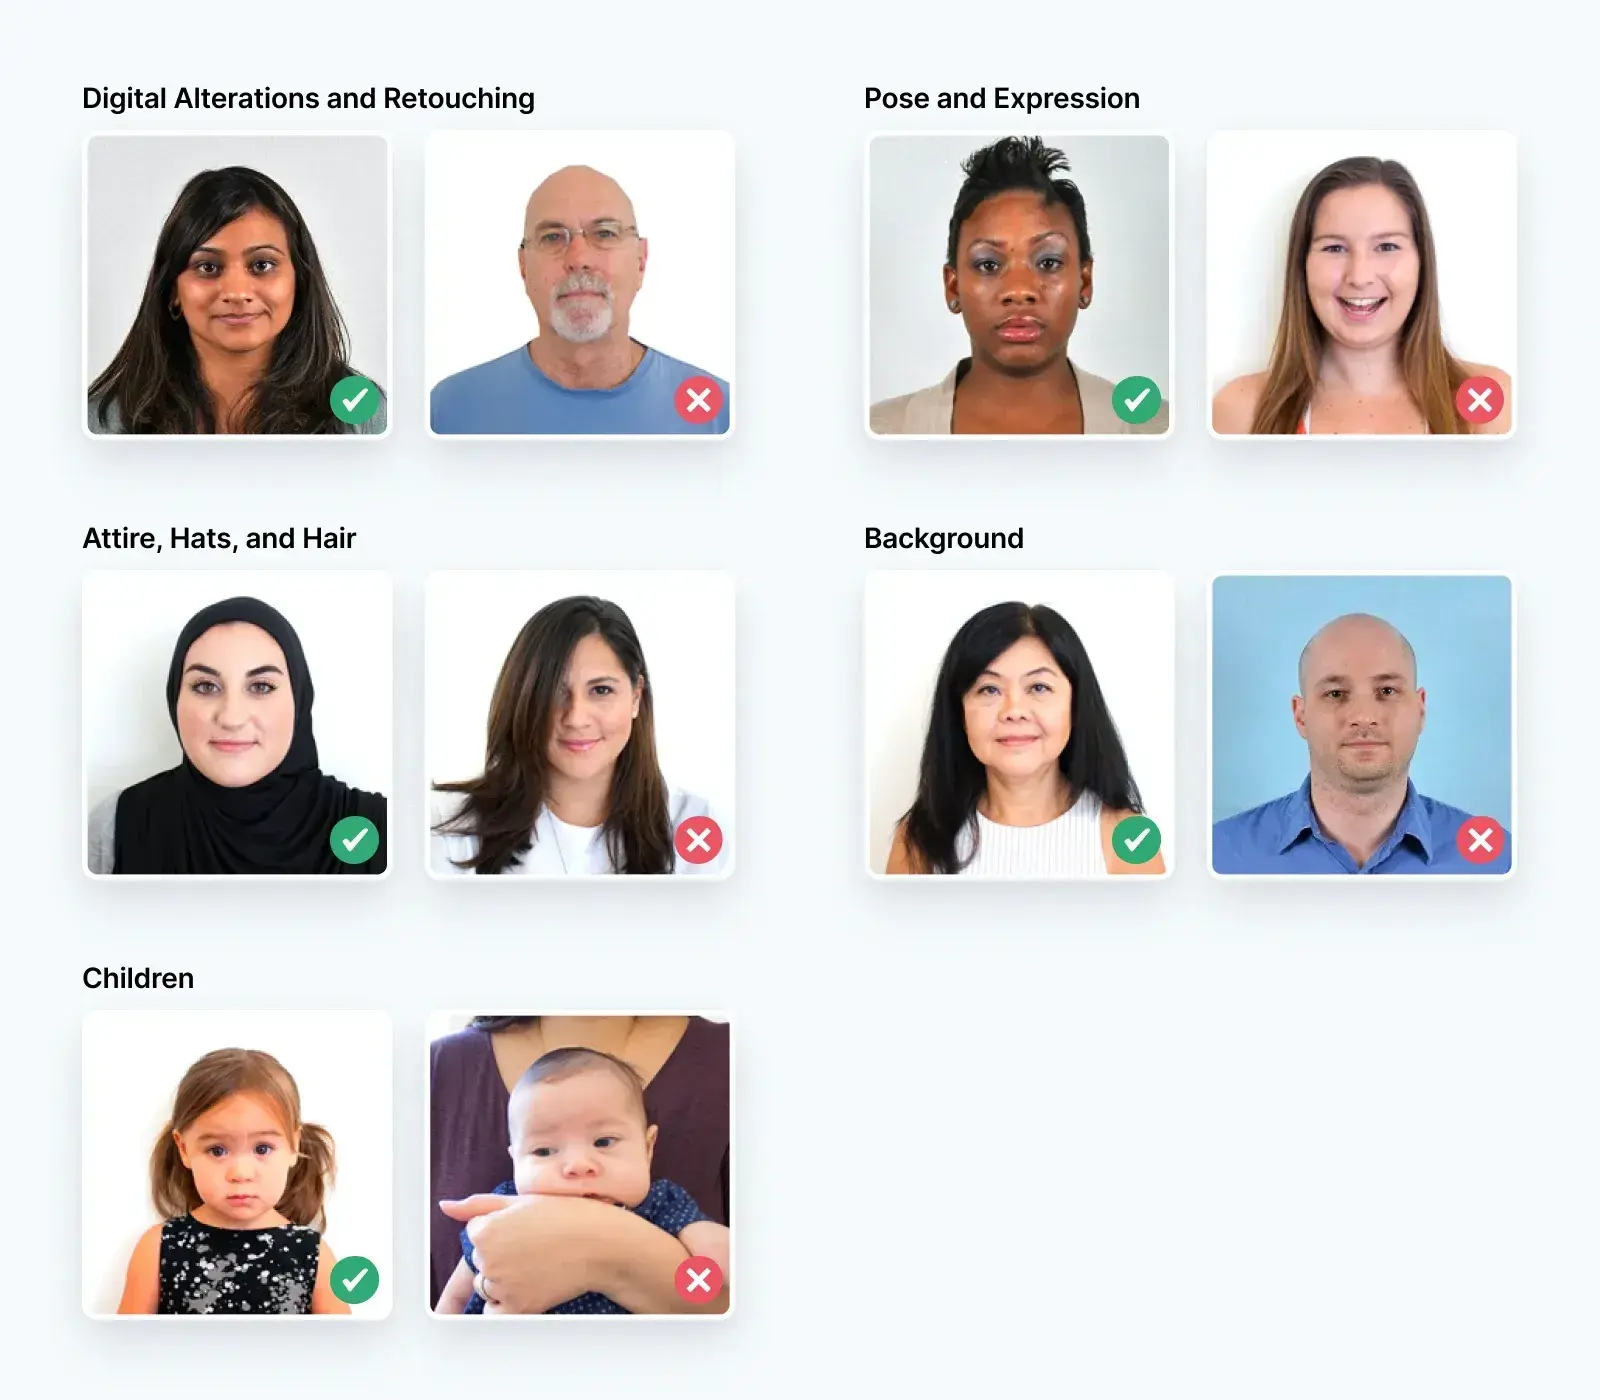 Real-life photo examples of compliant and non-compliant 2x2 passport photos.